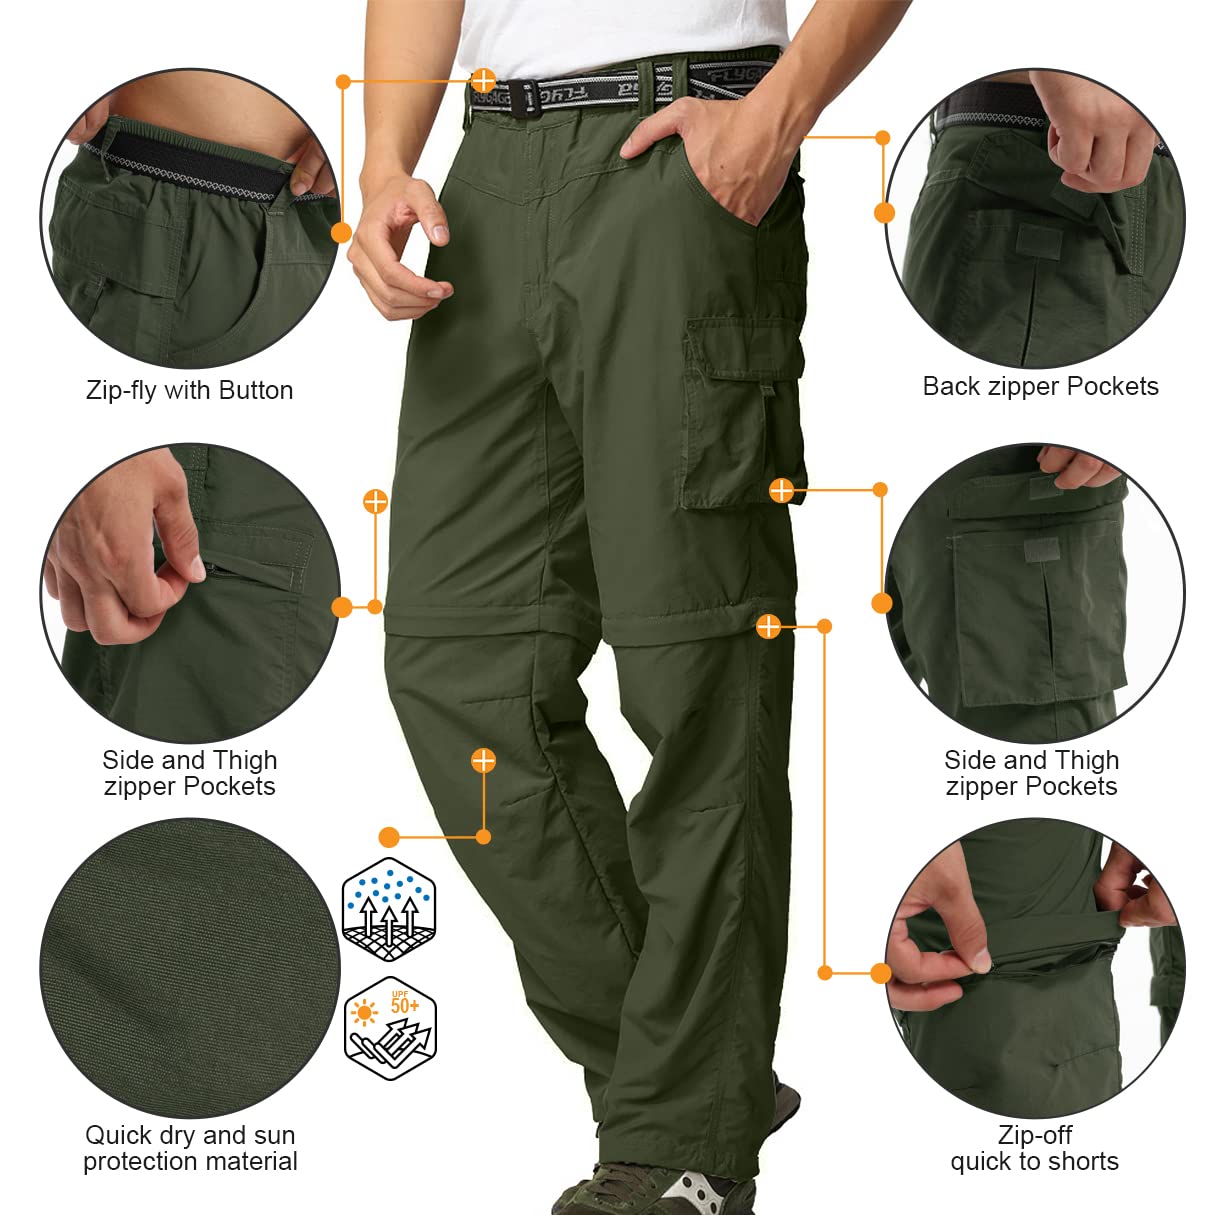 linlon Men's Outdoor Quick Dry Convertible Lightweight Hiking Fishing Zip Off Cargo Work Pants Trousers,Army Green,34